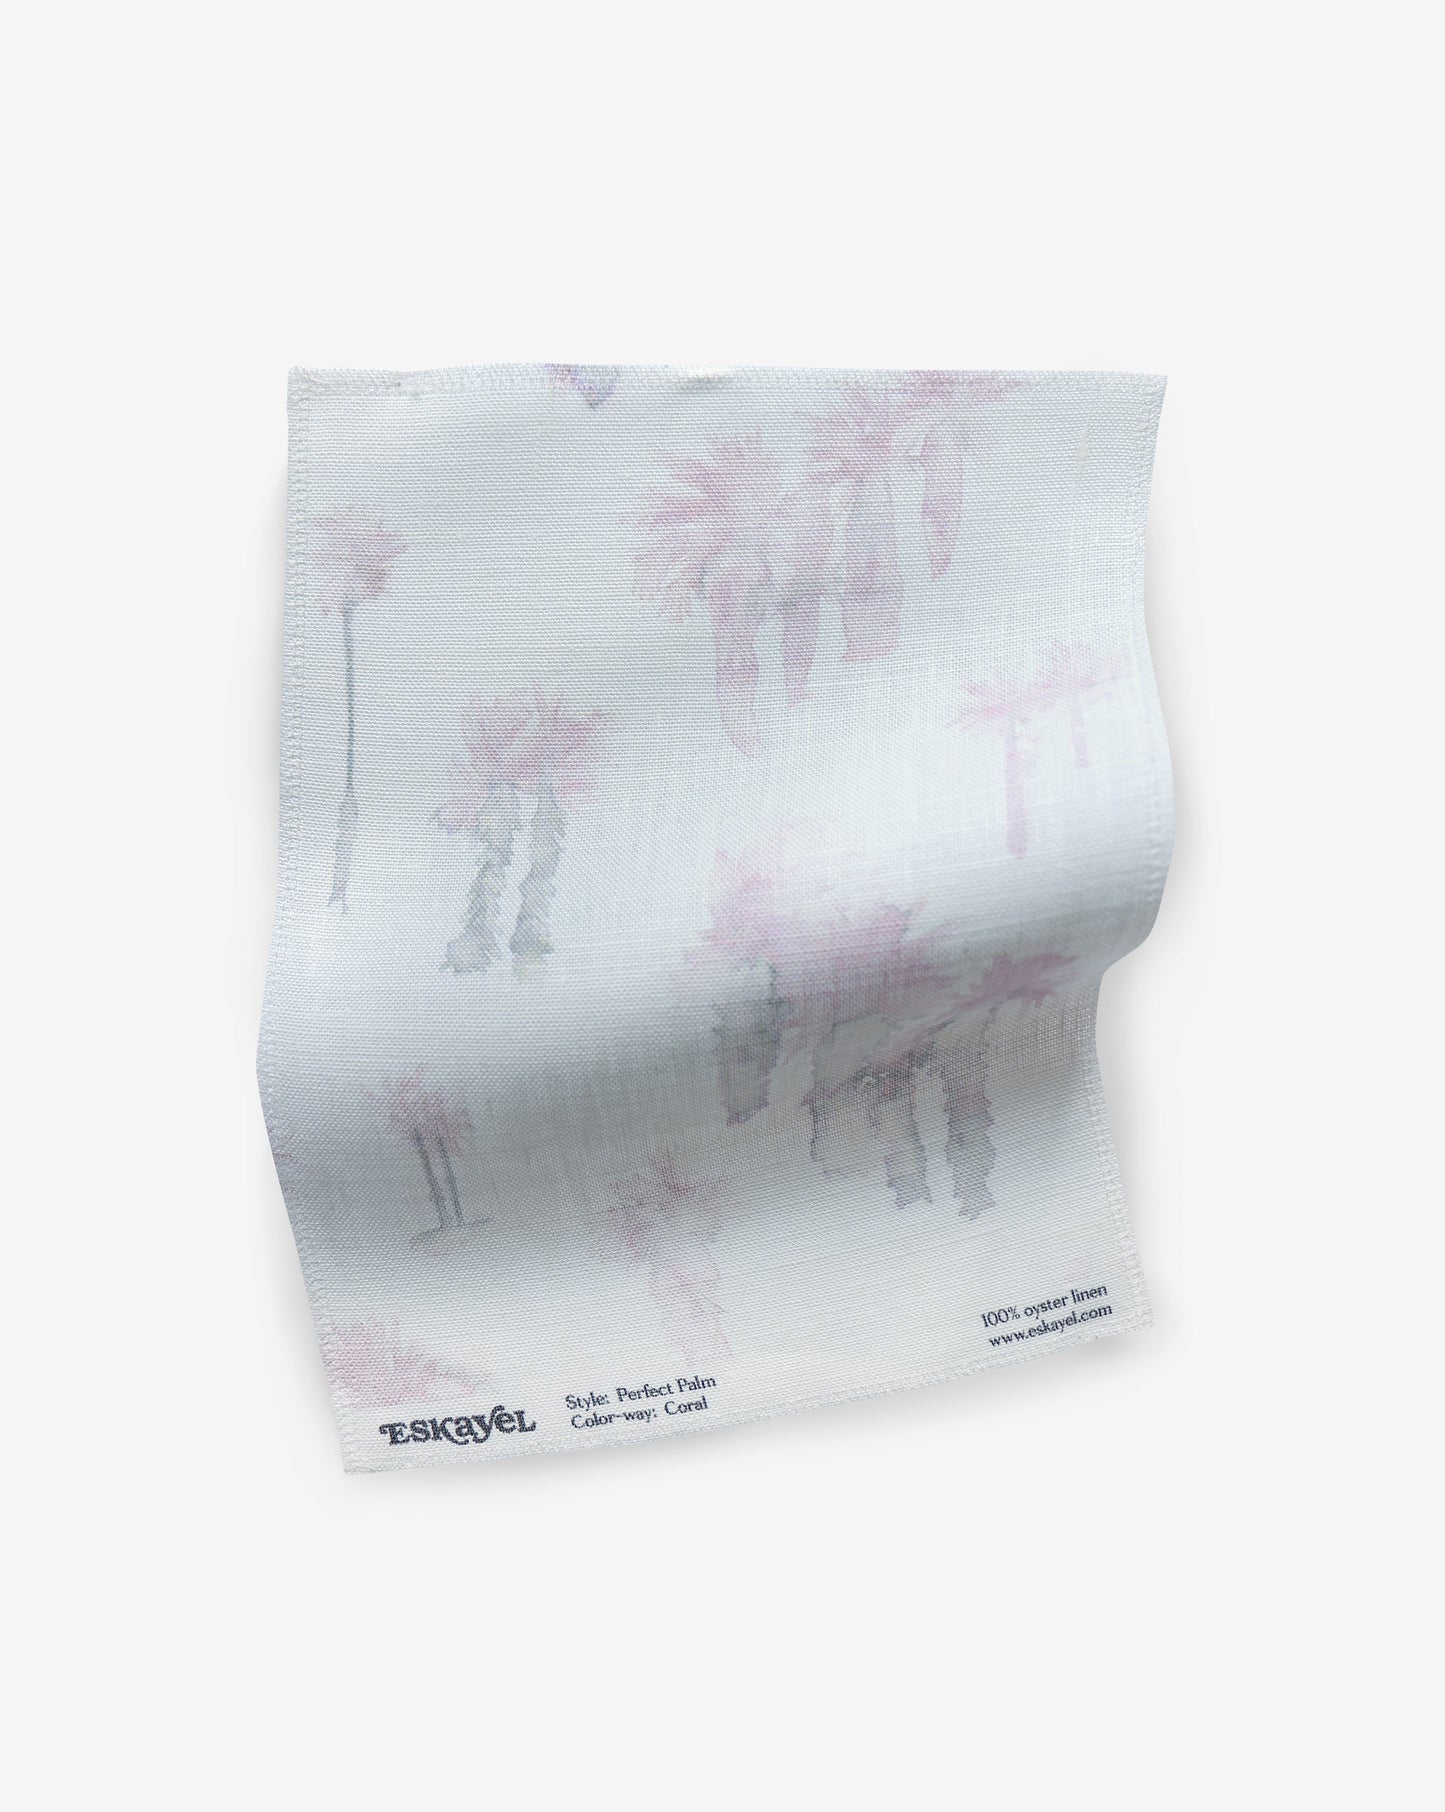 A white Perfect Palm Fabric Sample Coral fabric with pink palm trees on it